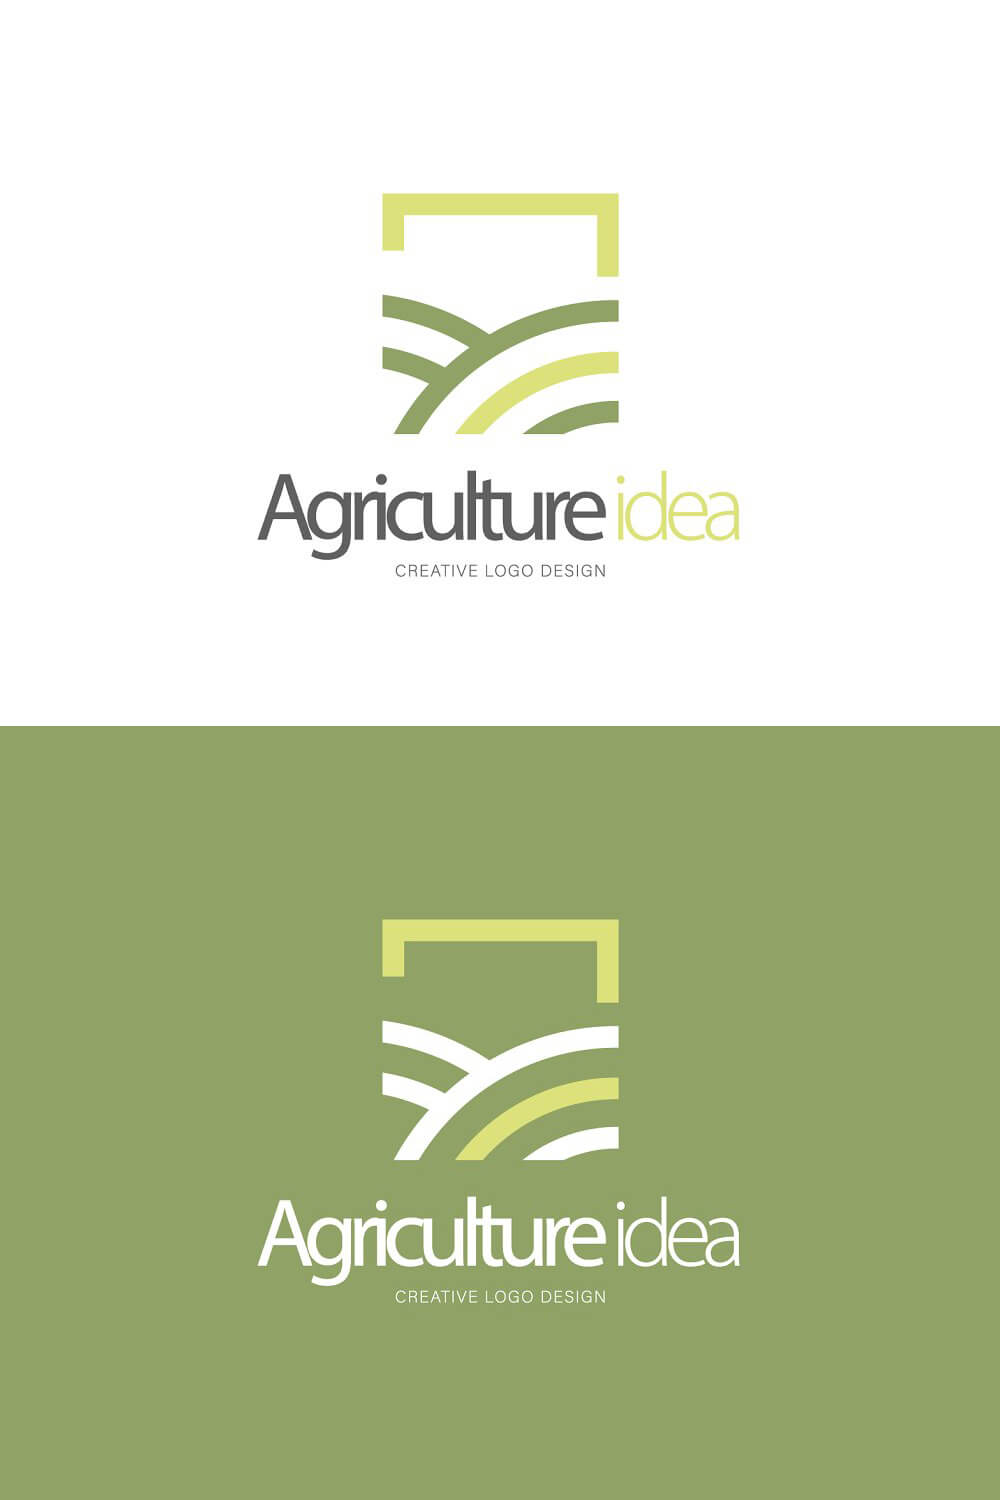 Color logo of agriculture idea on white and green backgrounds.